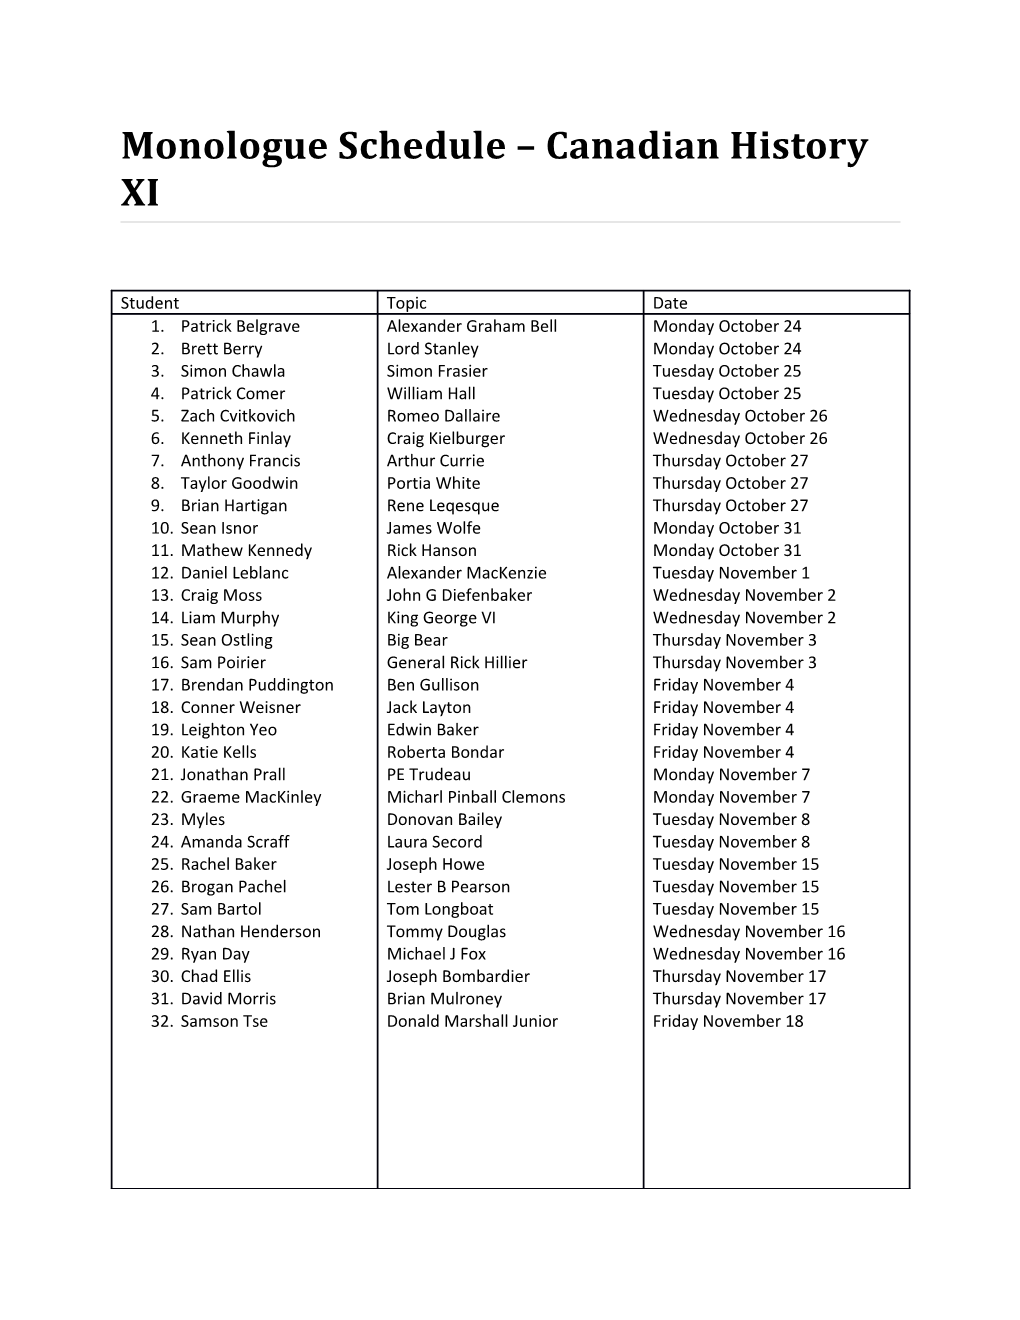 Monologue Schedule Canadian History XI